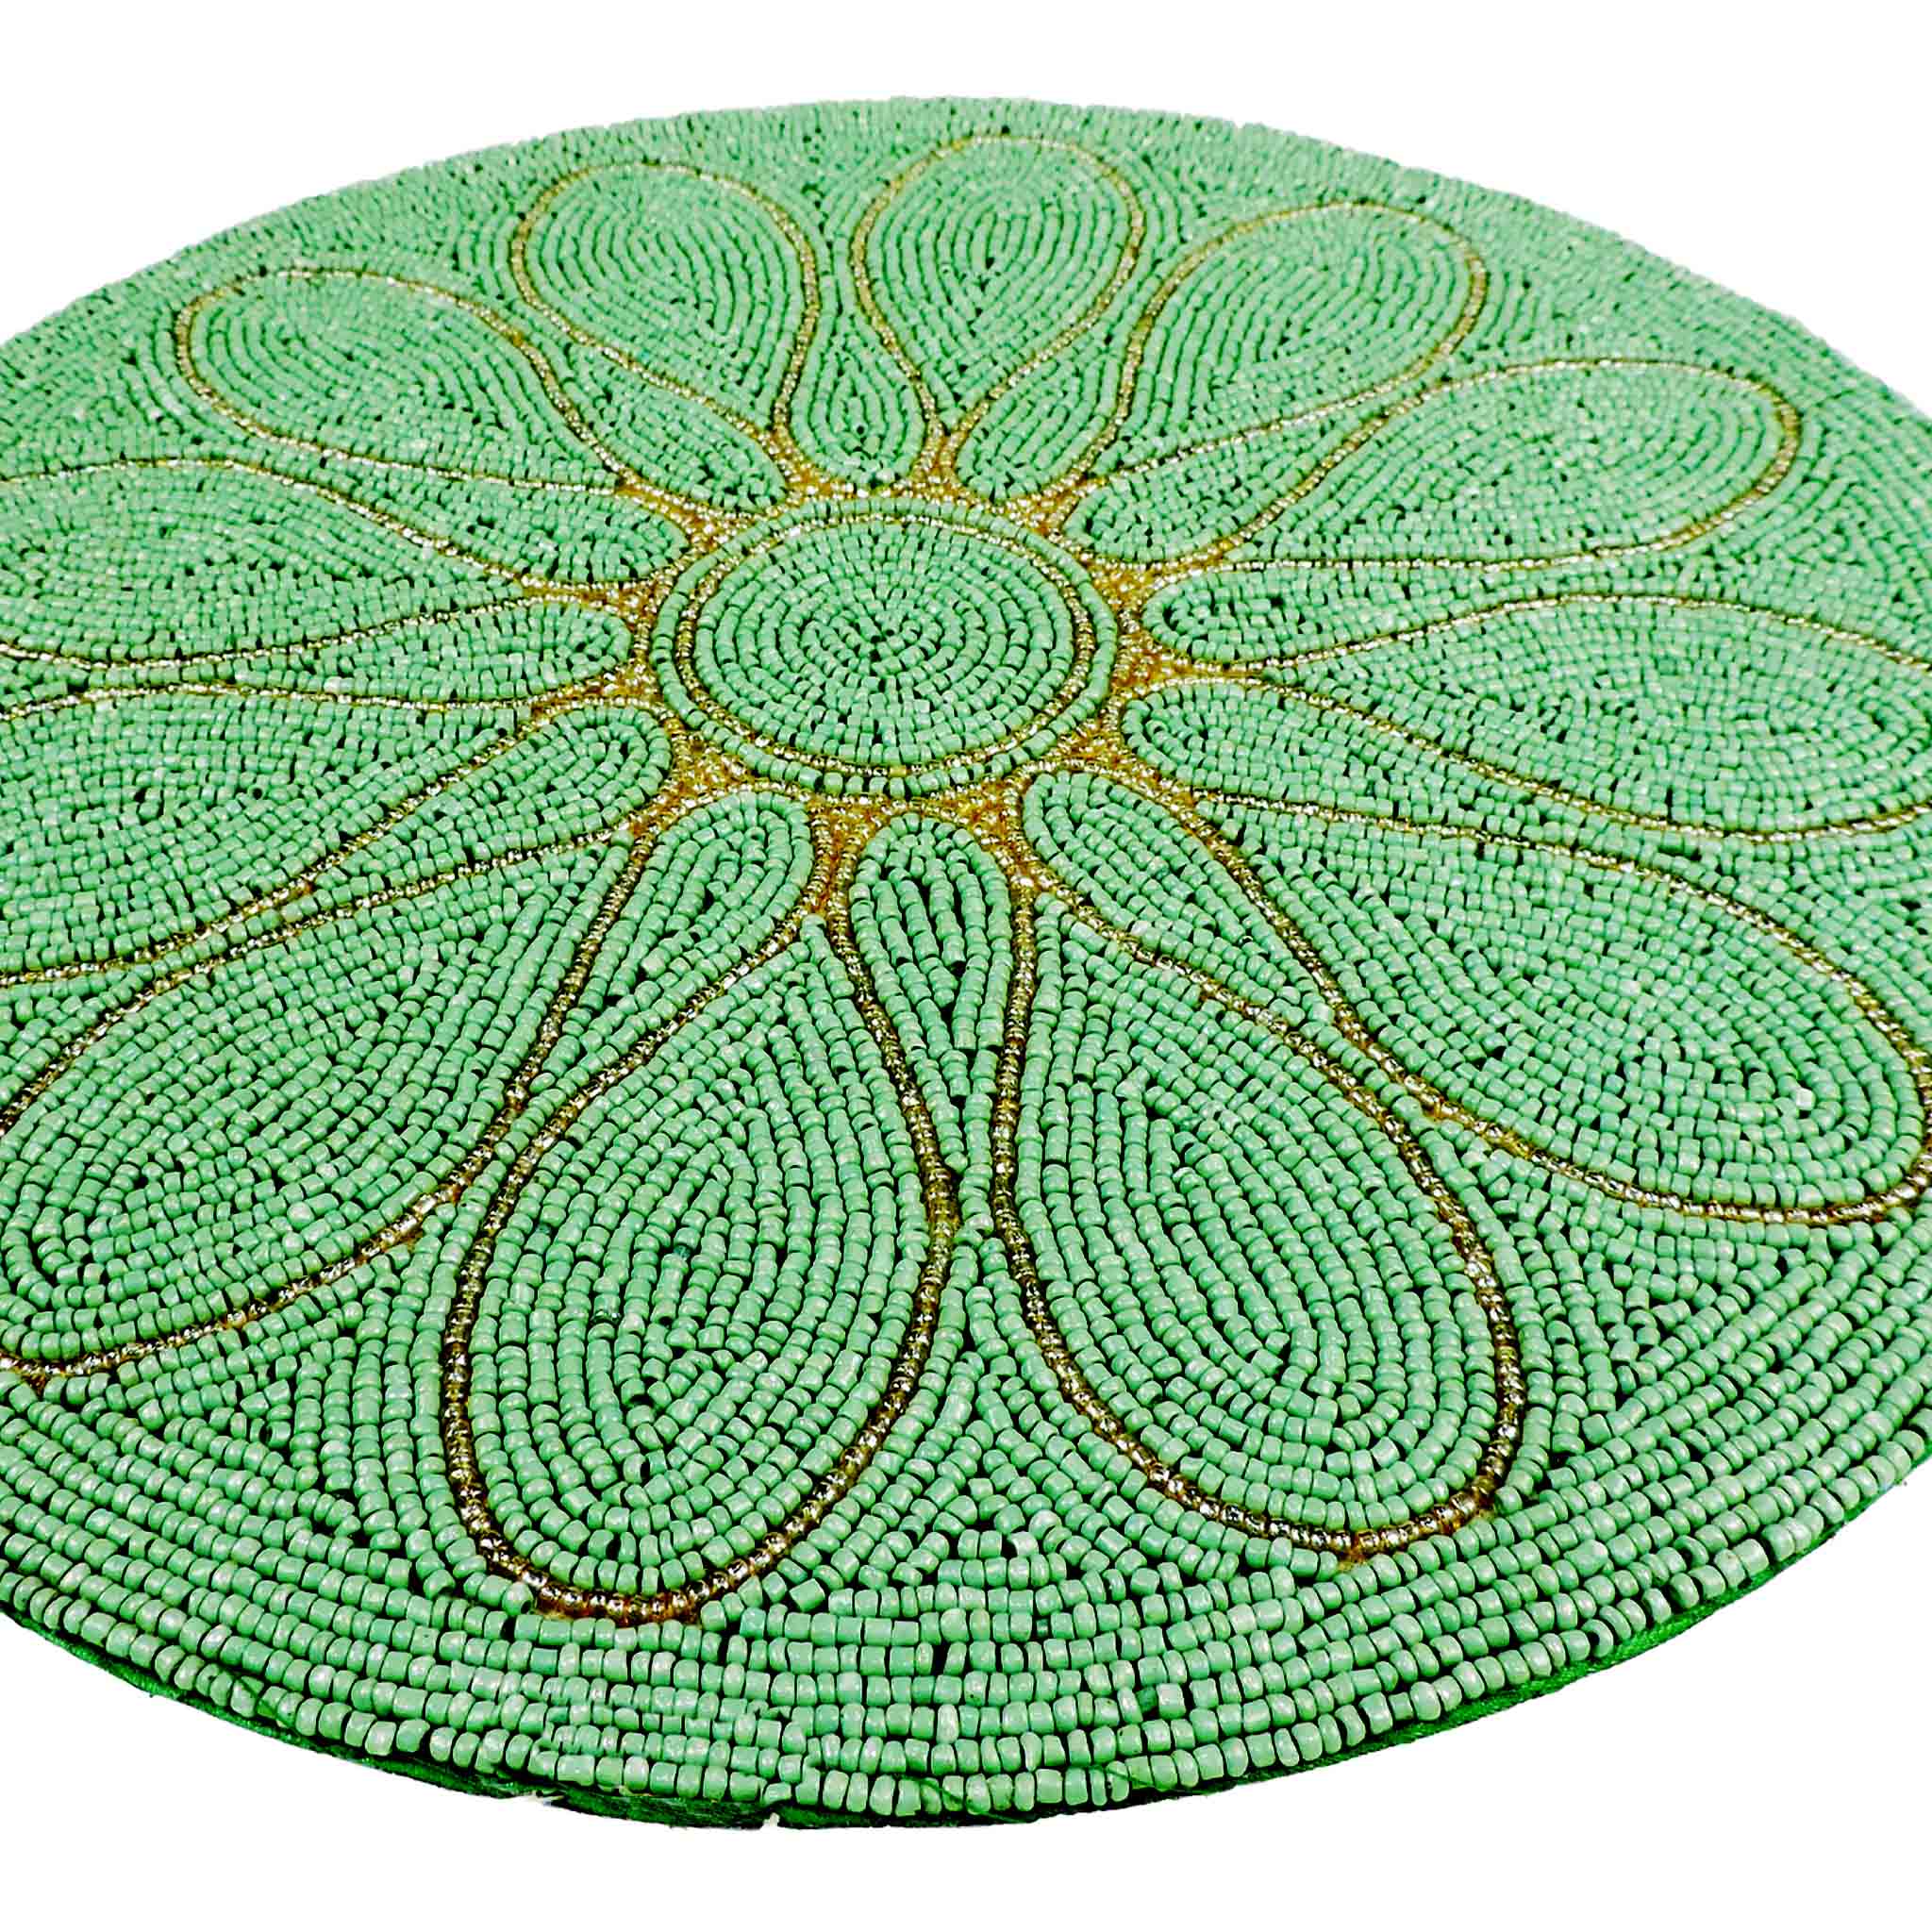 Petal Impressions Bead Embroidered Placemat in Pale Green, Set of 2/4